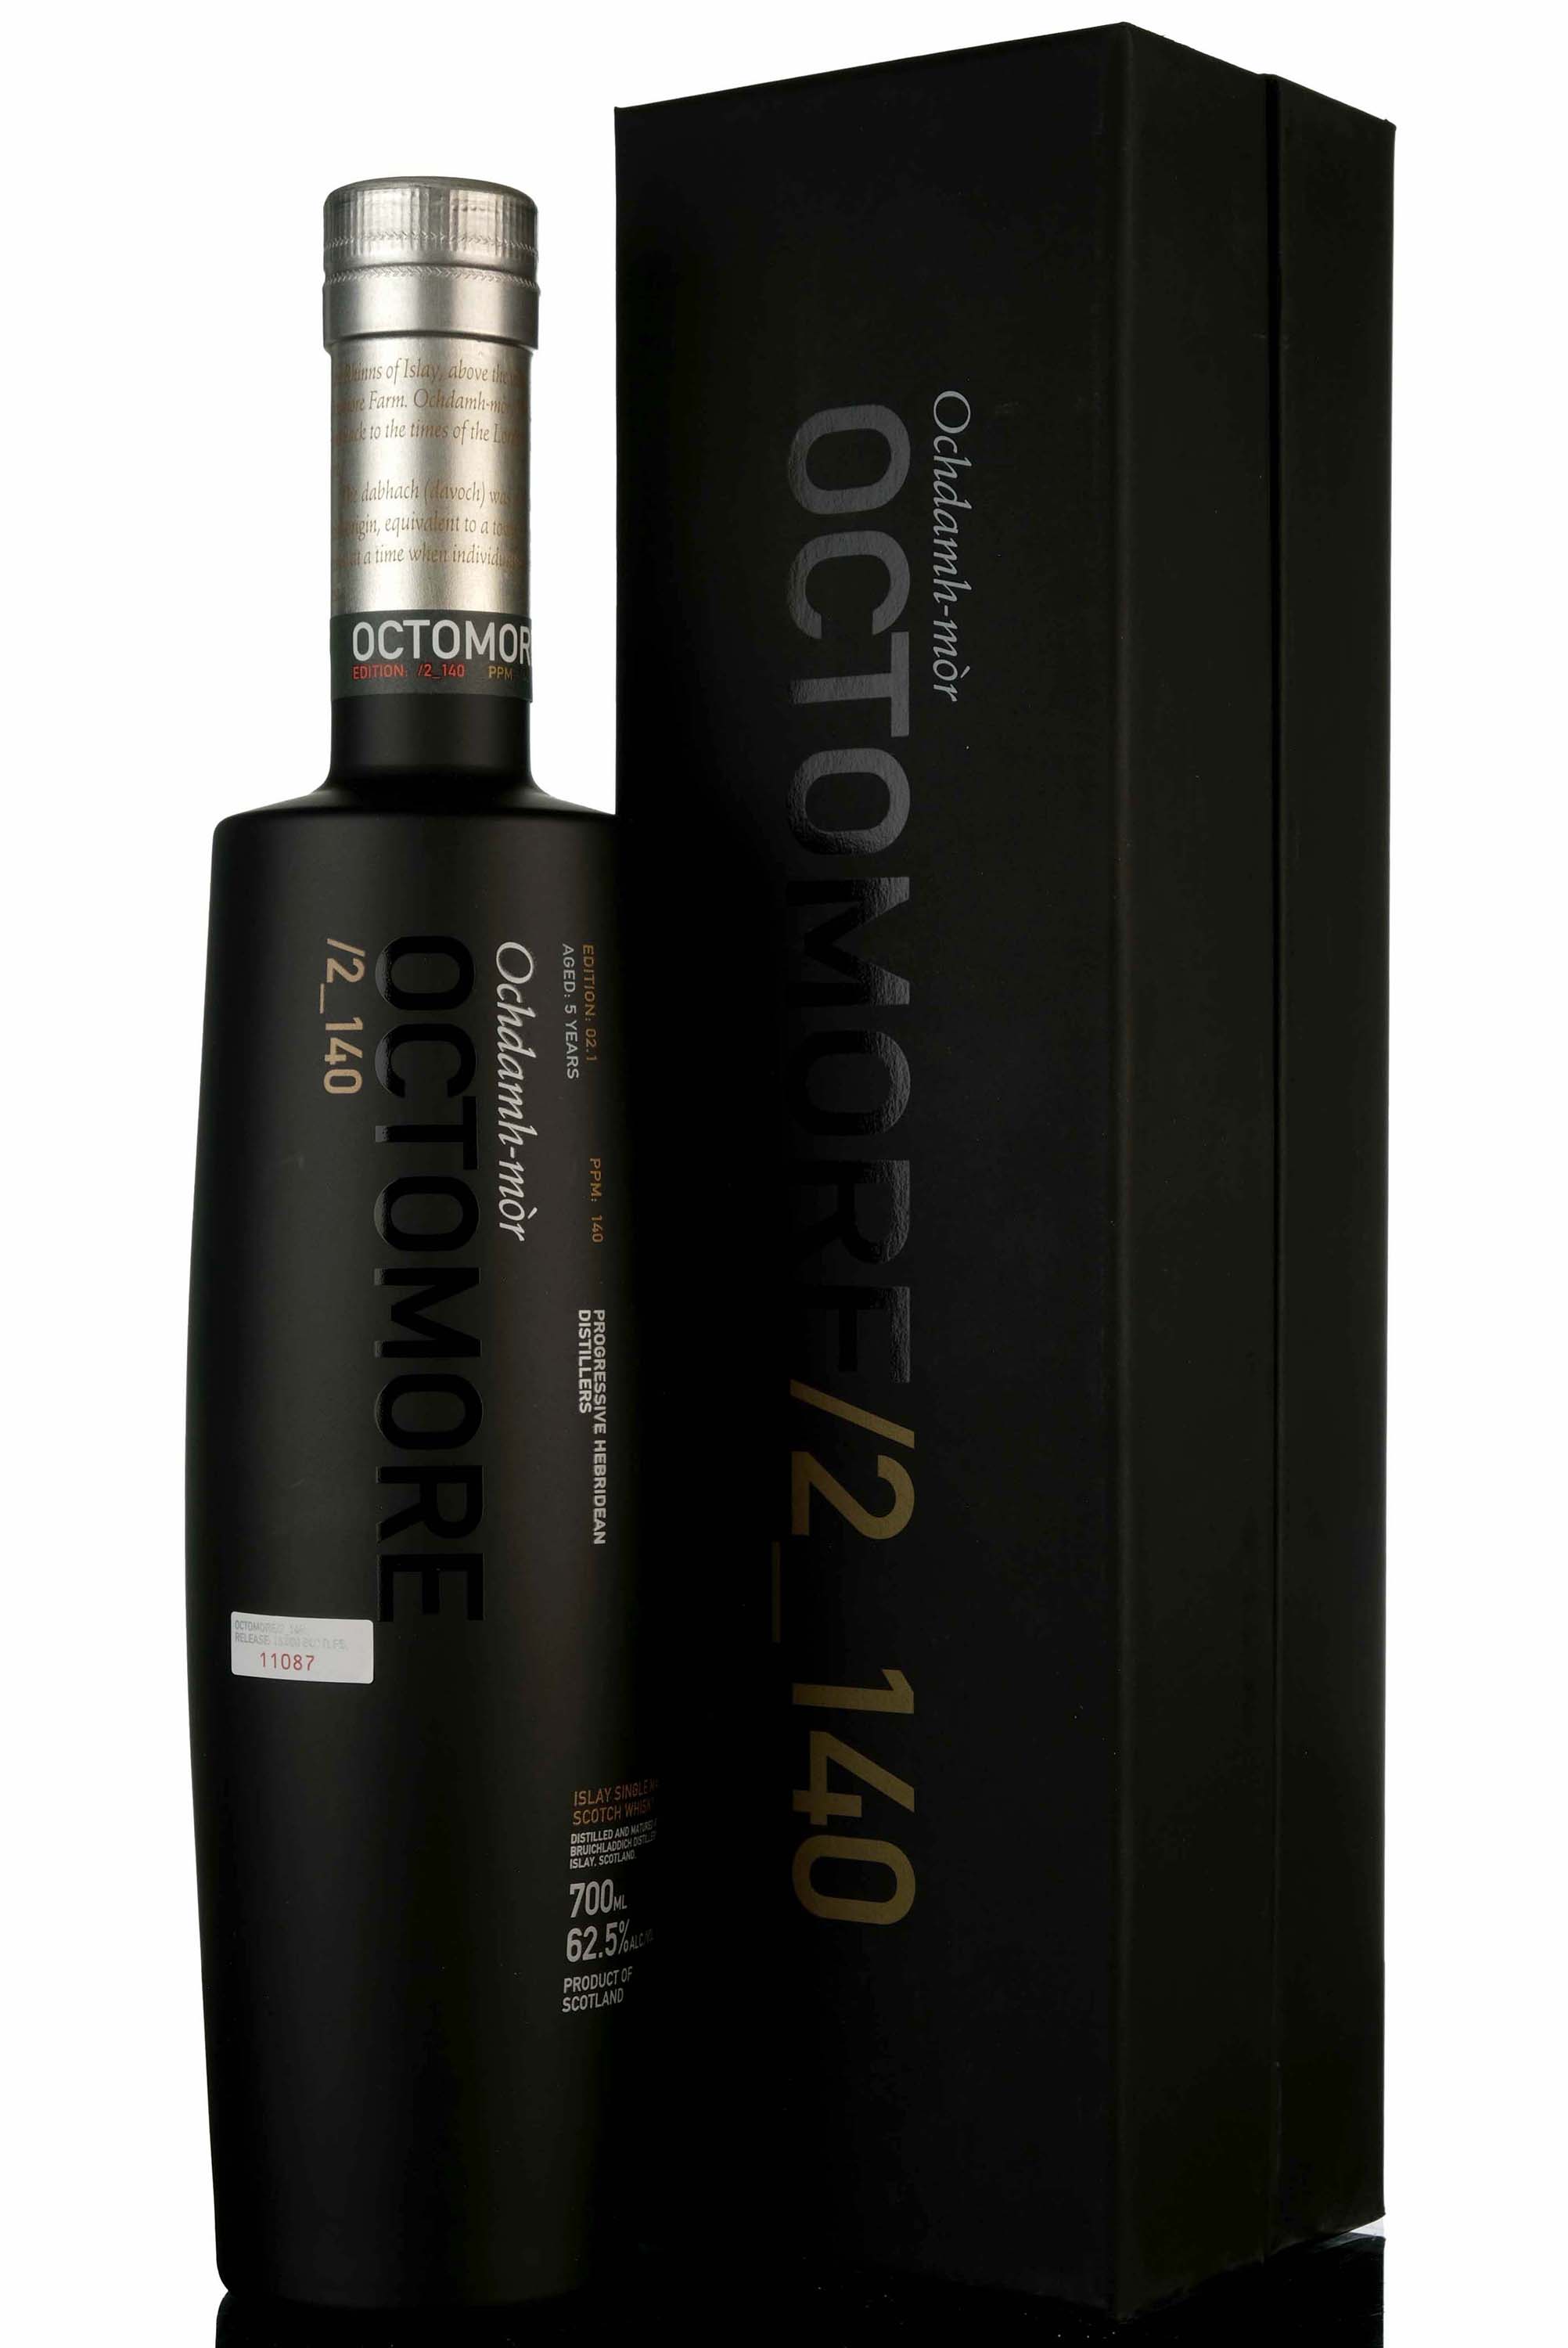 Octomore 5 Year Old - Edition 02.1 - 2009 Release